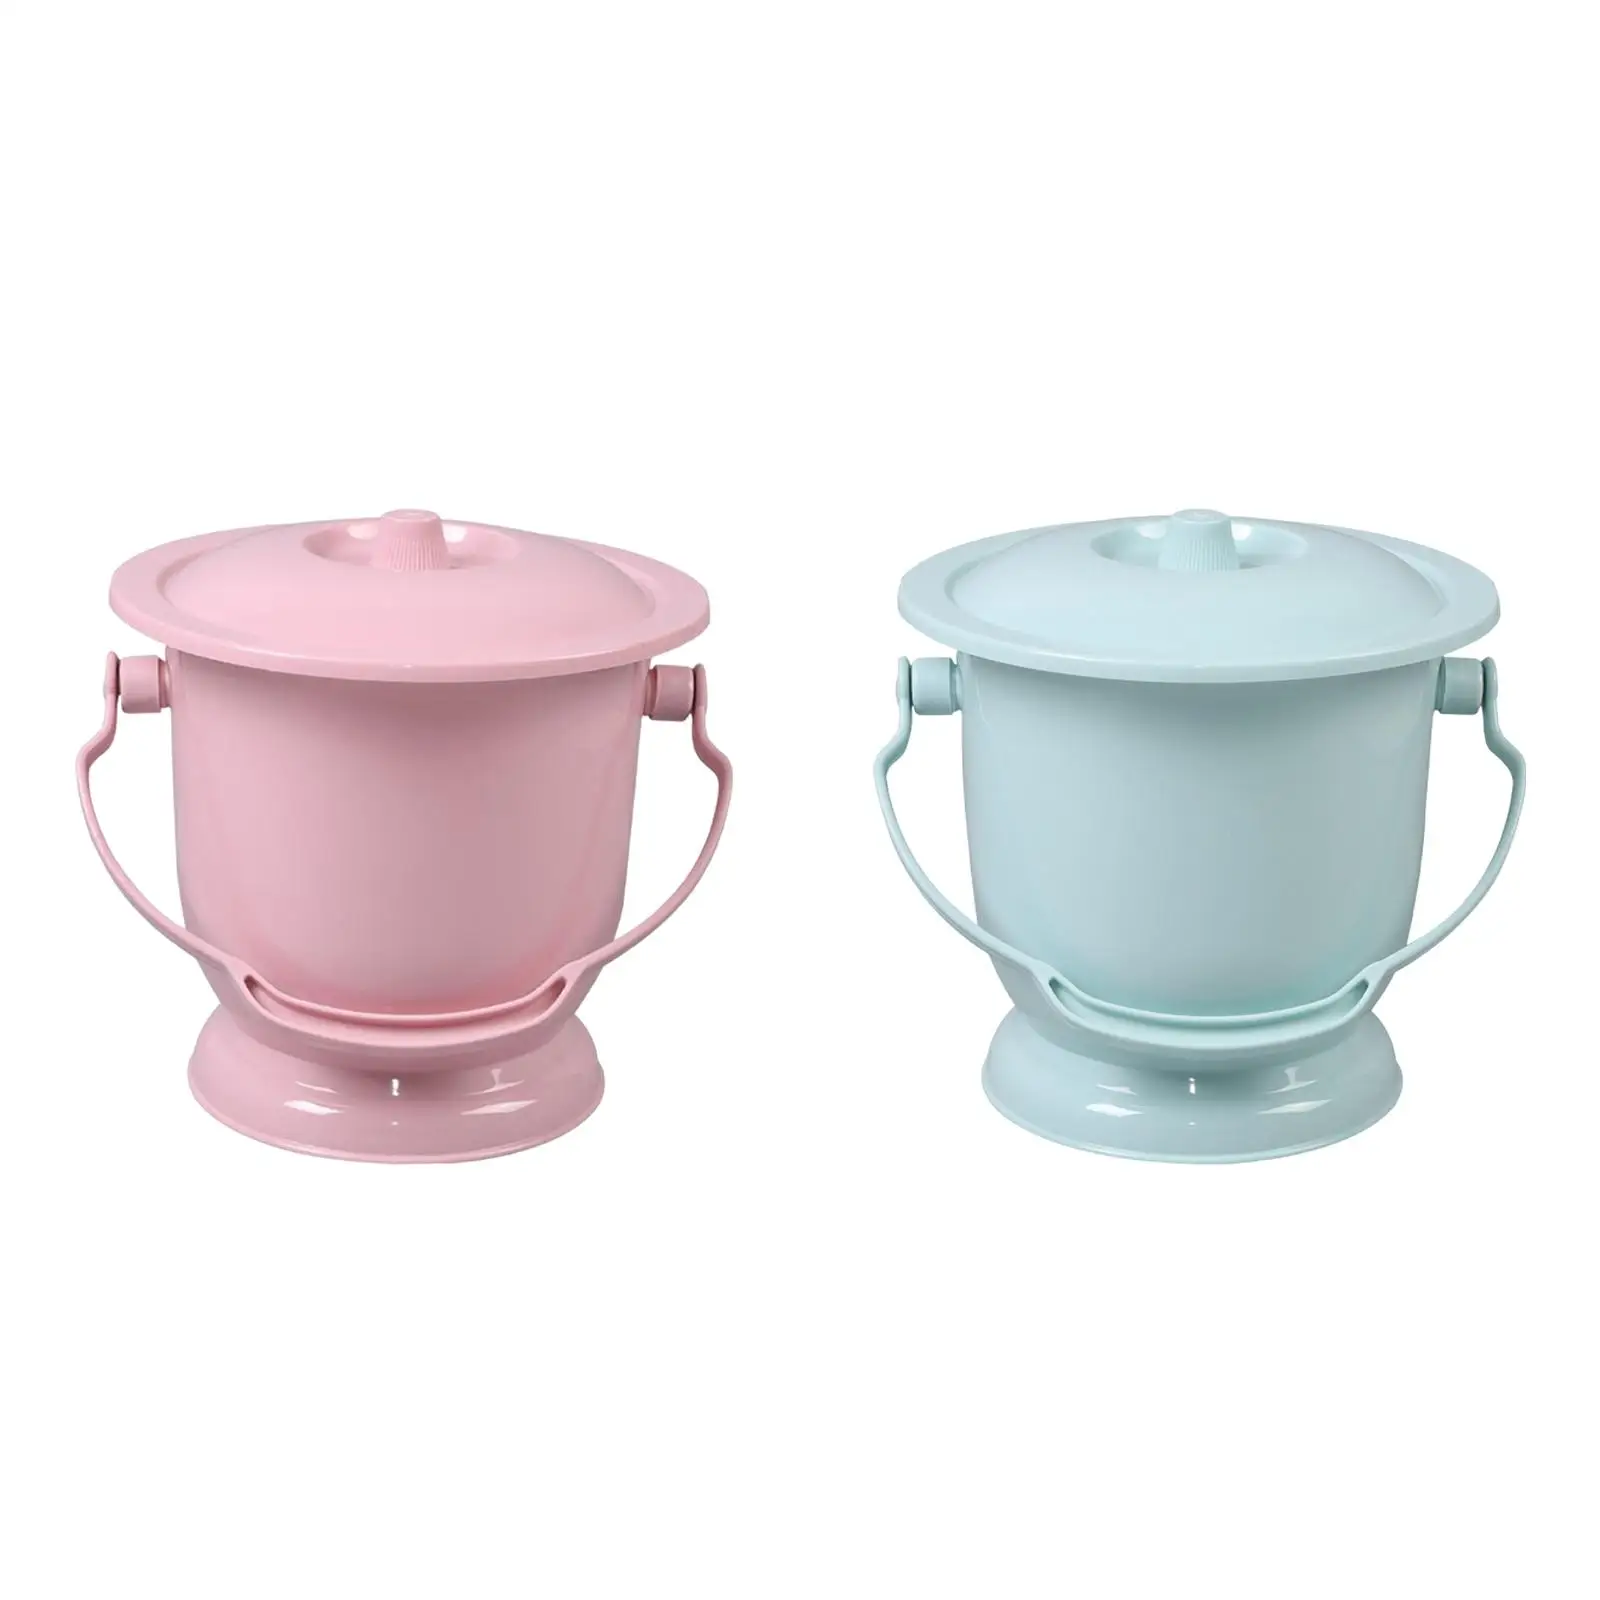 Handheld Spittoon with Lid  Use Fashion Practical  Bucket Mini Toilets for Household Women Bedroom Female Male